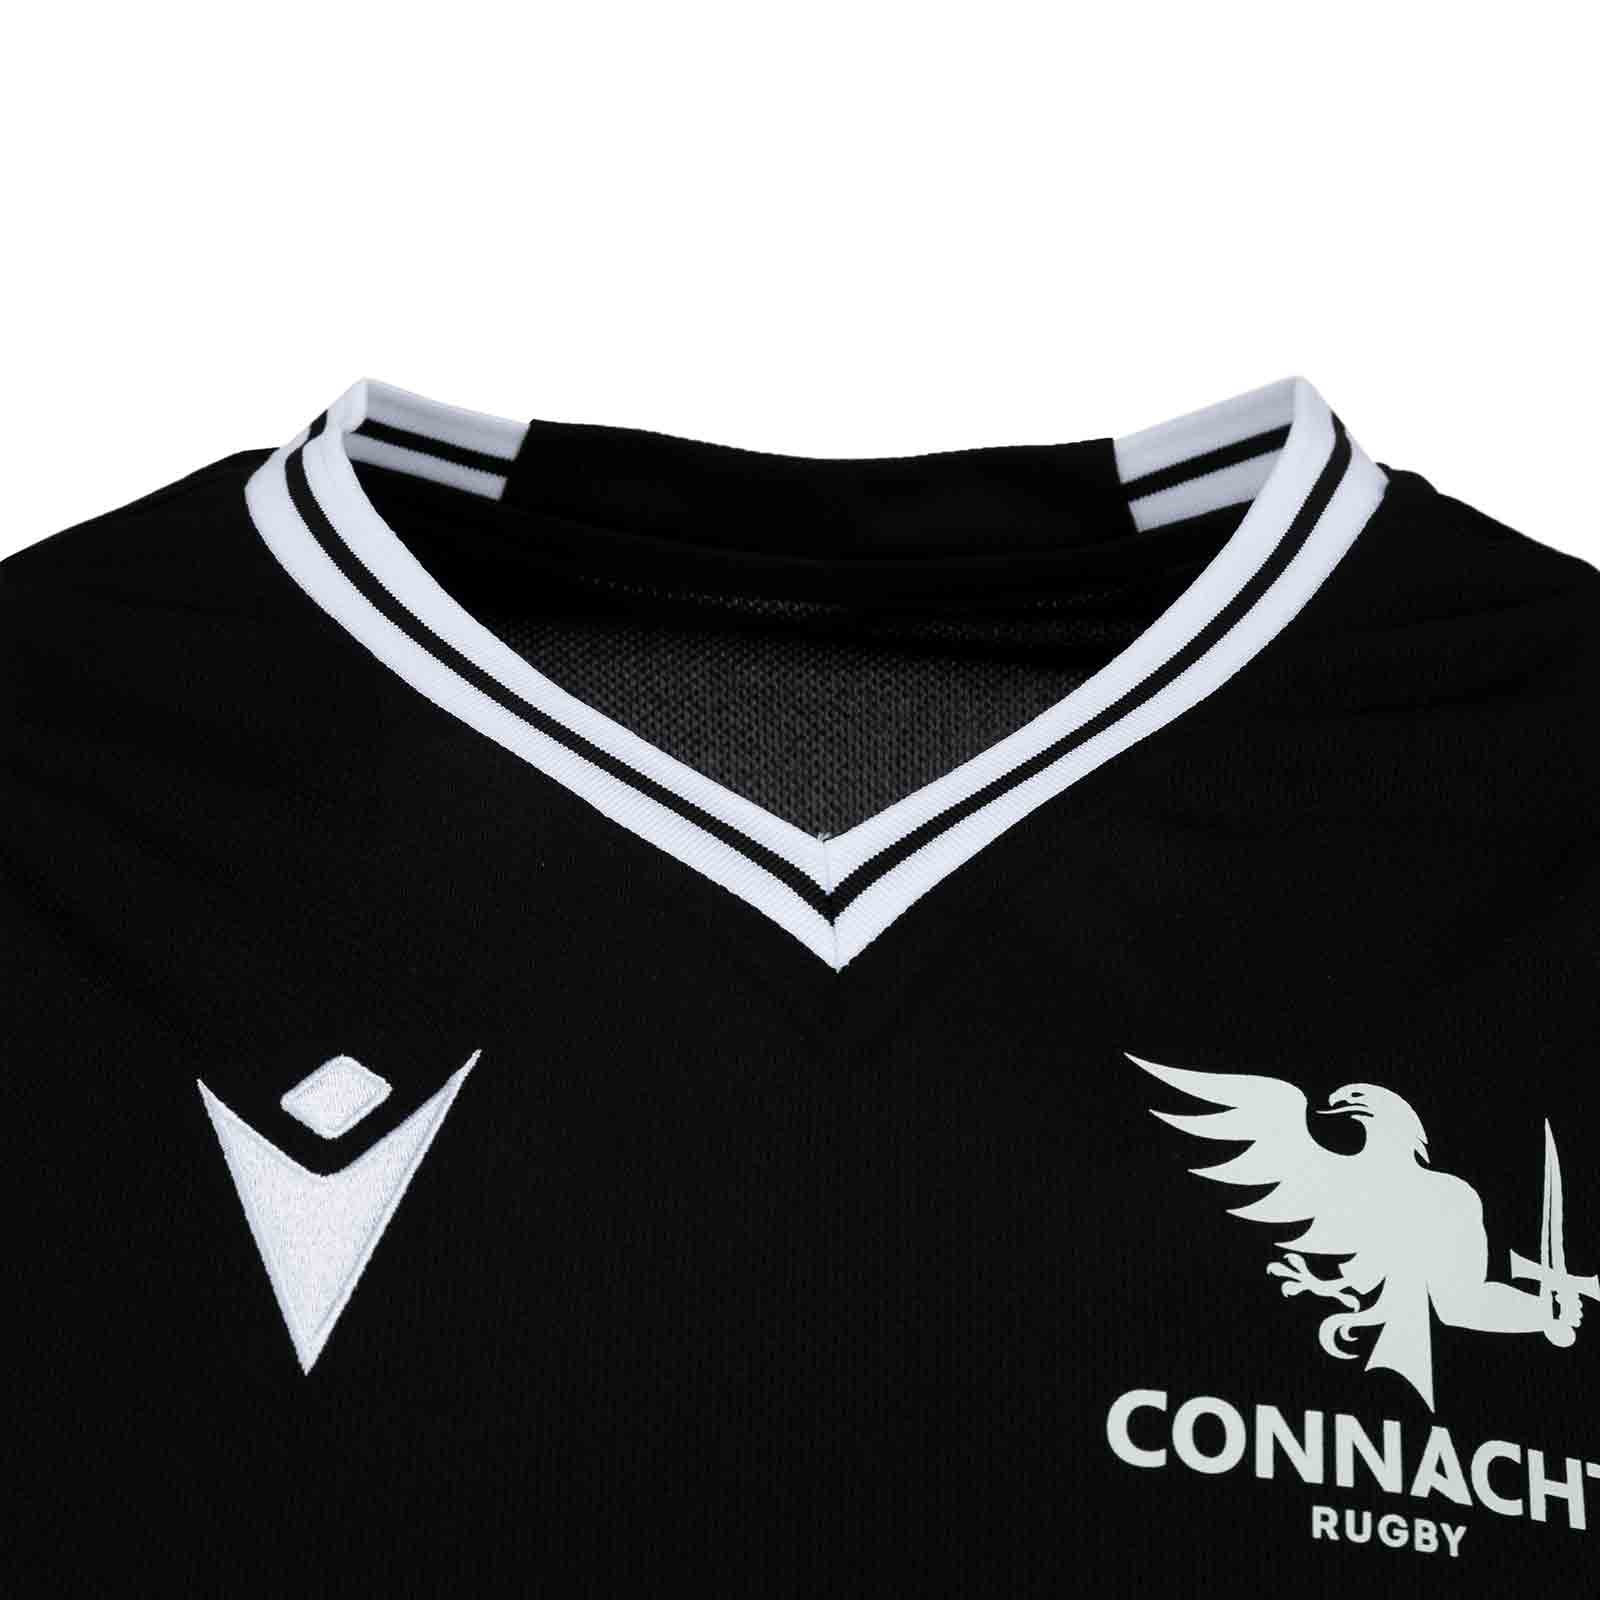 MACRON CONNACHT RUGBY 2023/24 PLAYER BASKETBALL TOP